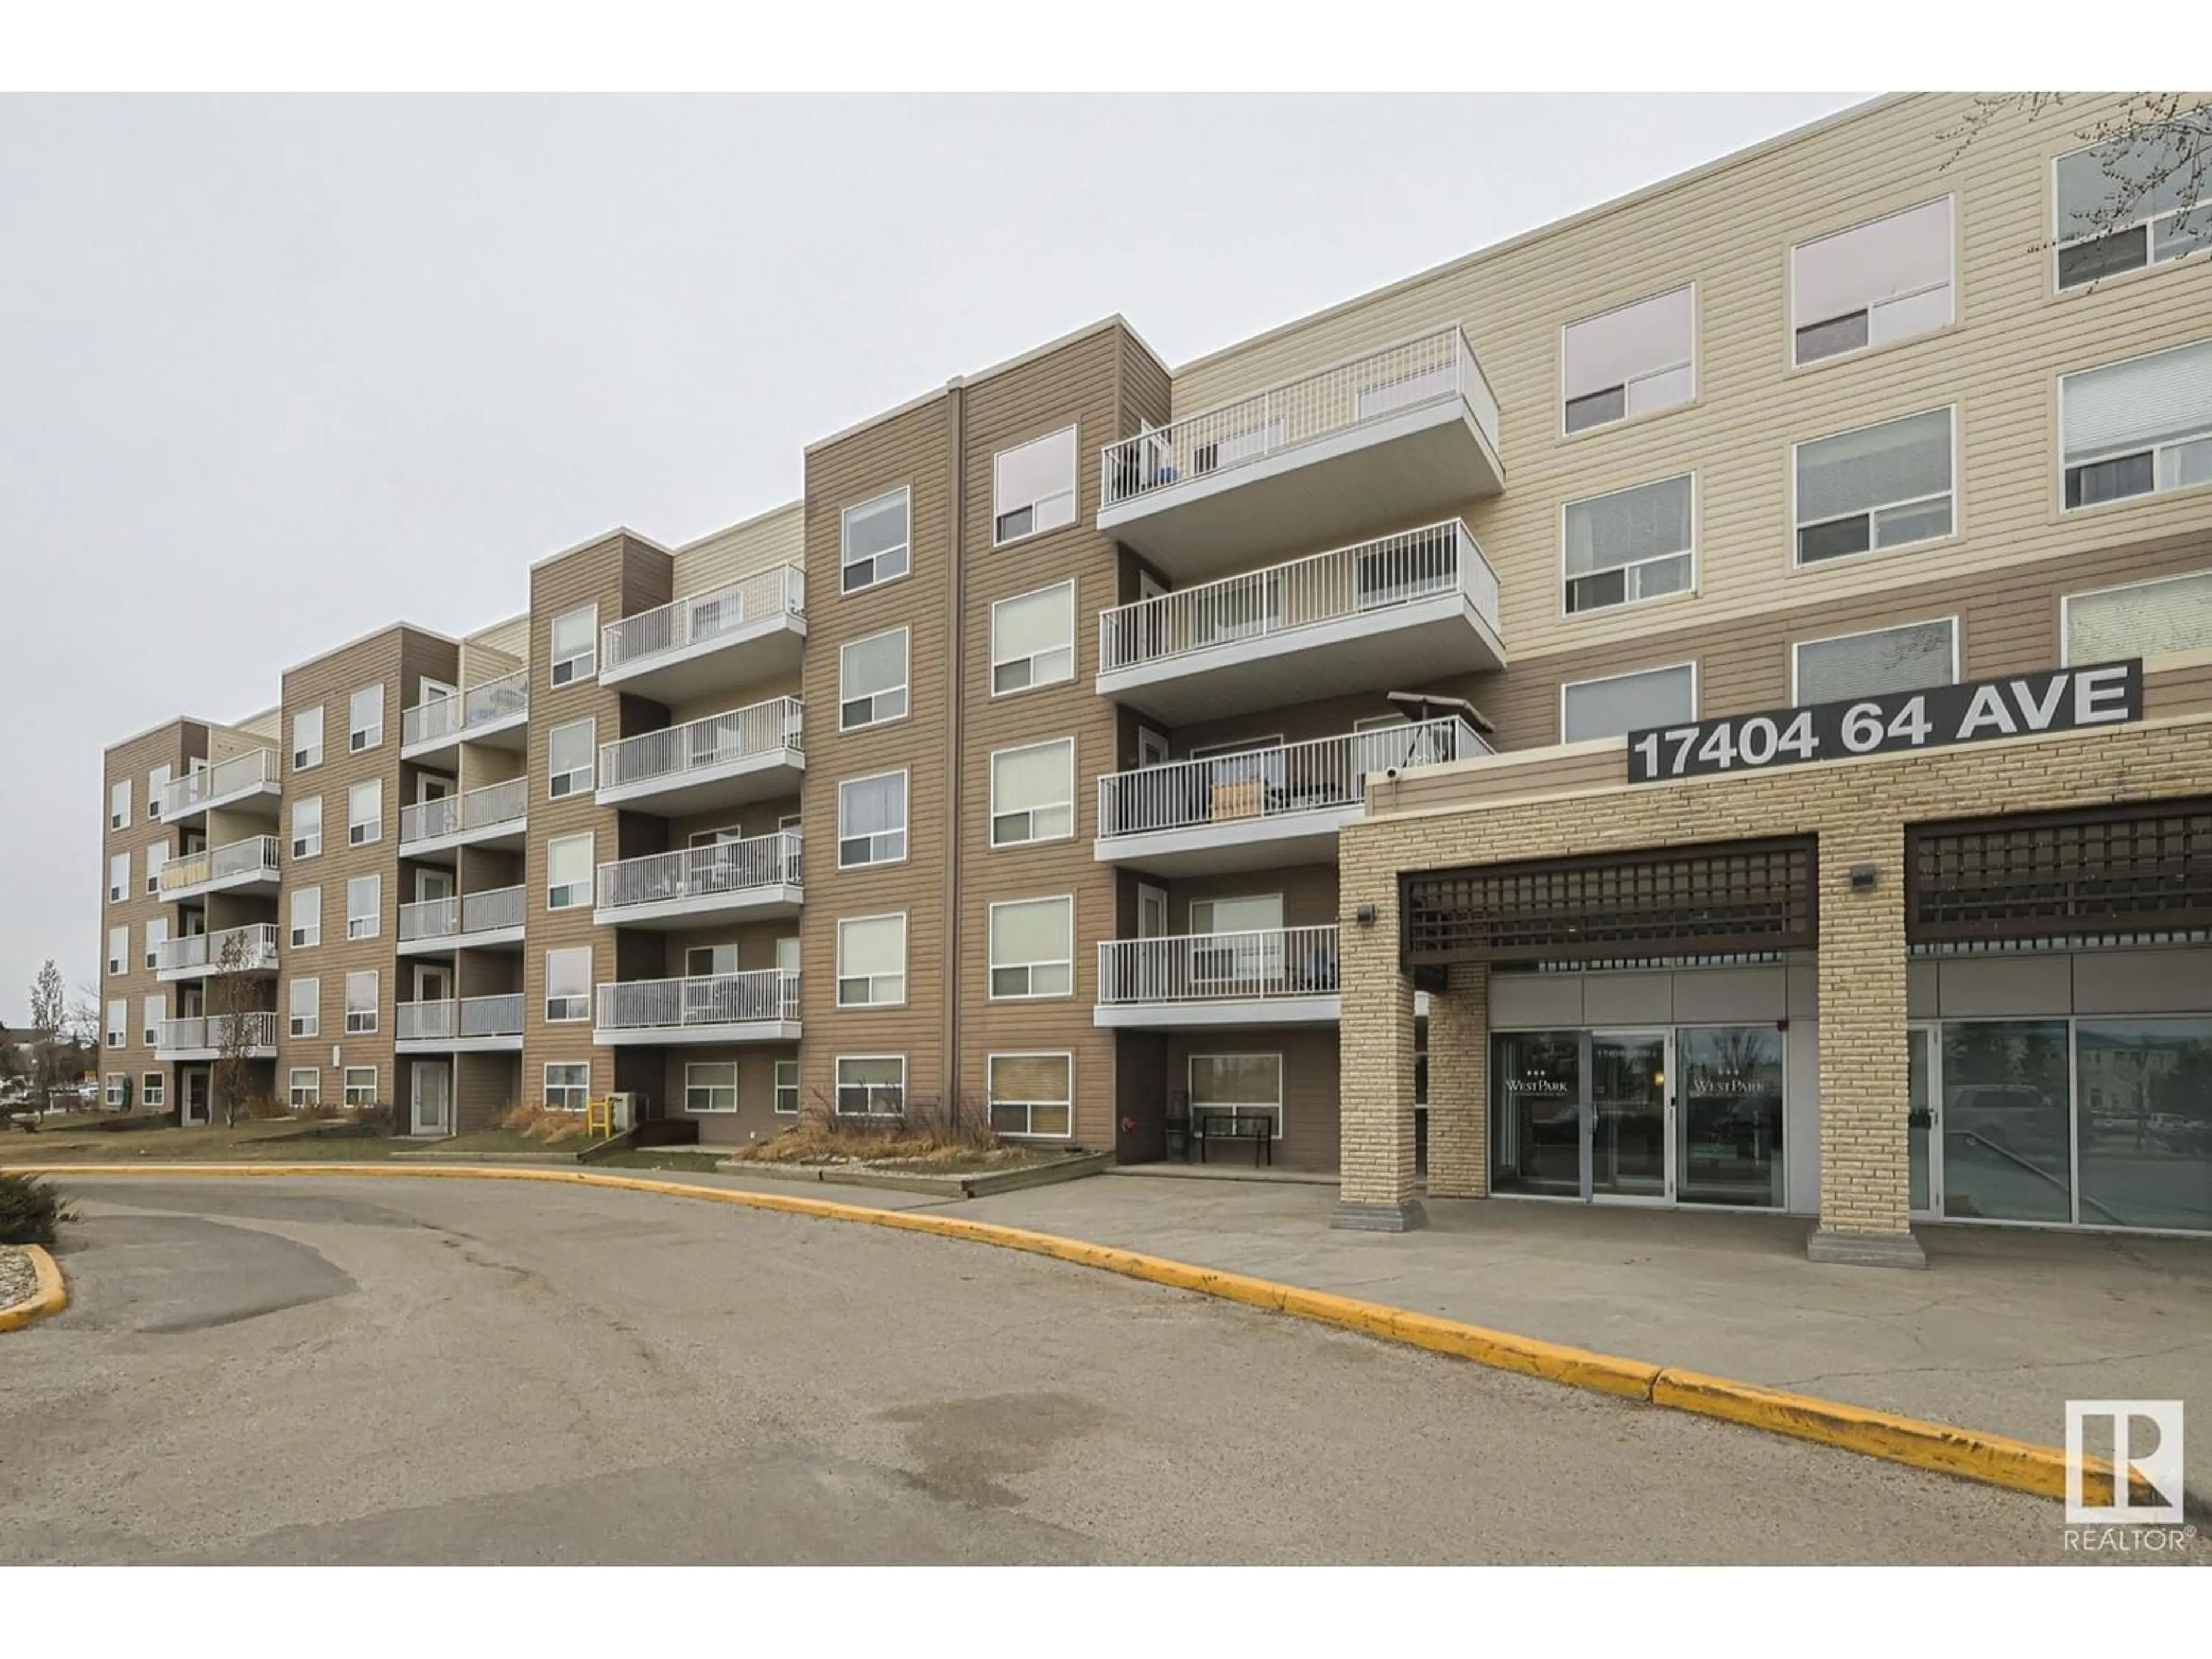 A pic from exterior of the house or condo for #105 17404 64 AV NW NW, Edmonton Alberta T5T6X4